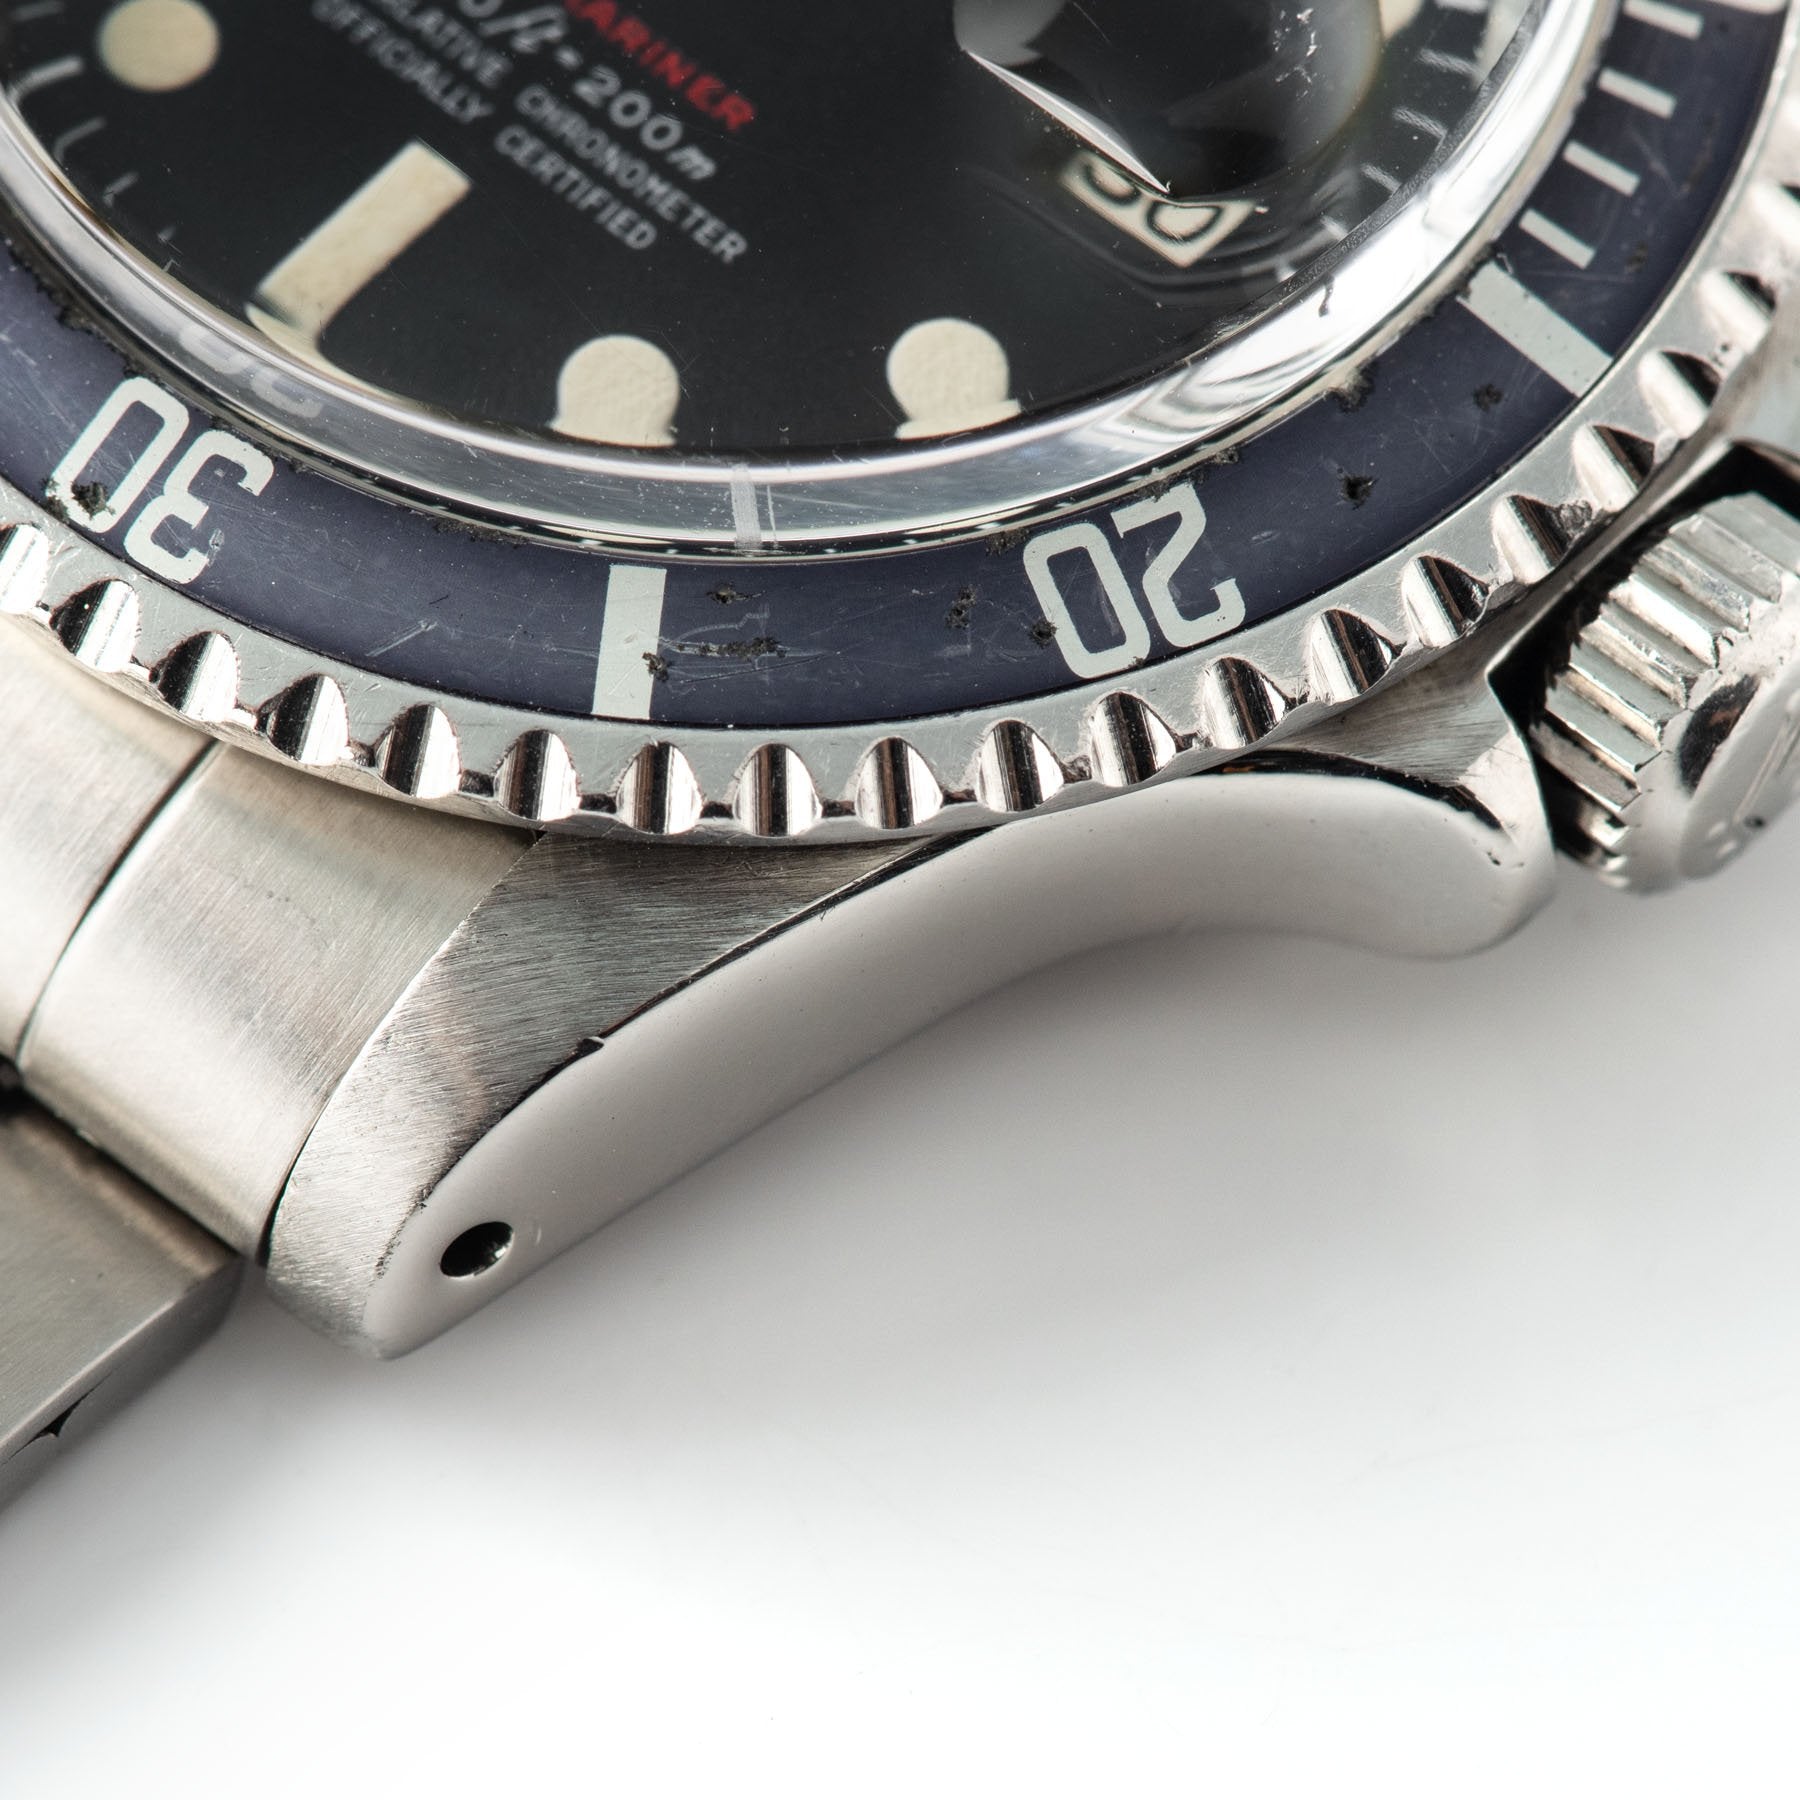 Rolex Red Submariner Date 1680 Mk4 Dial